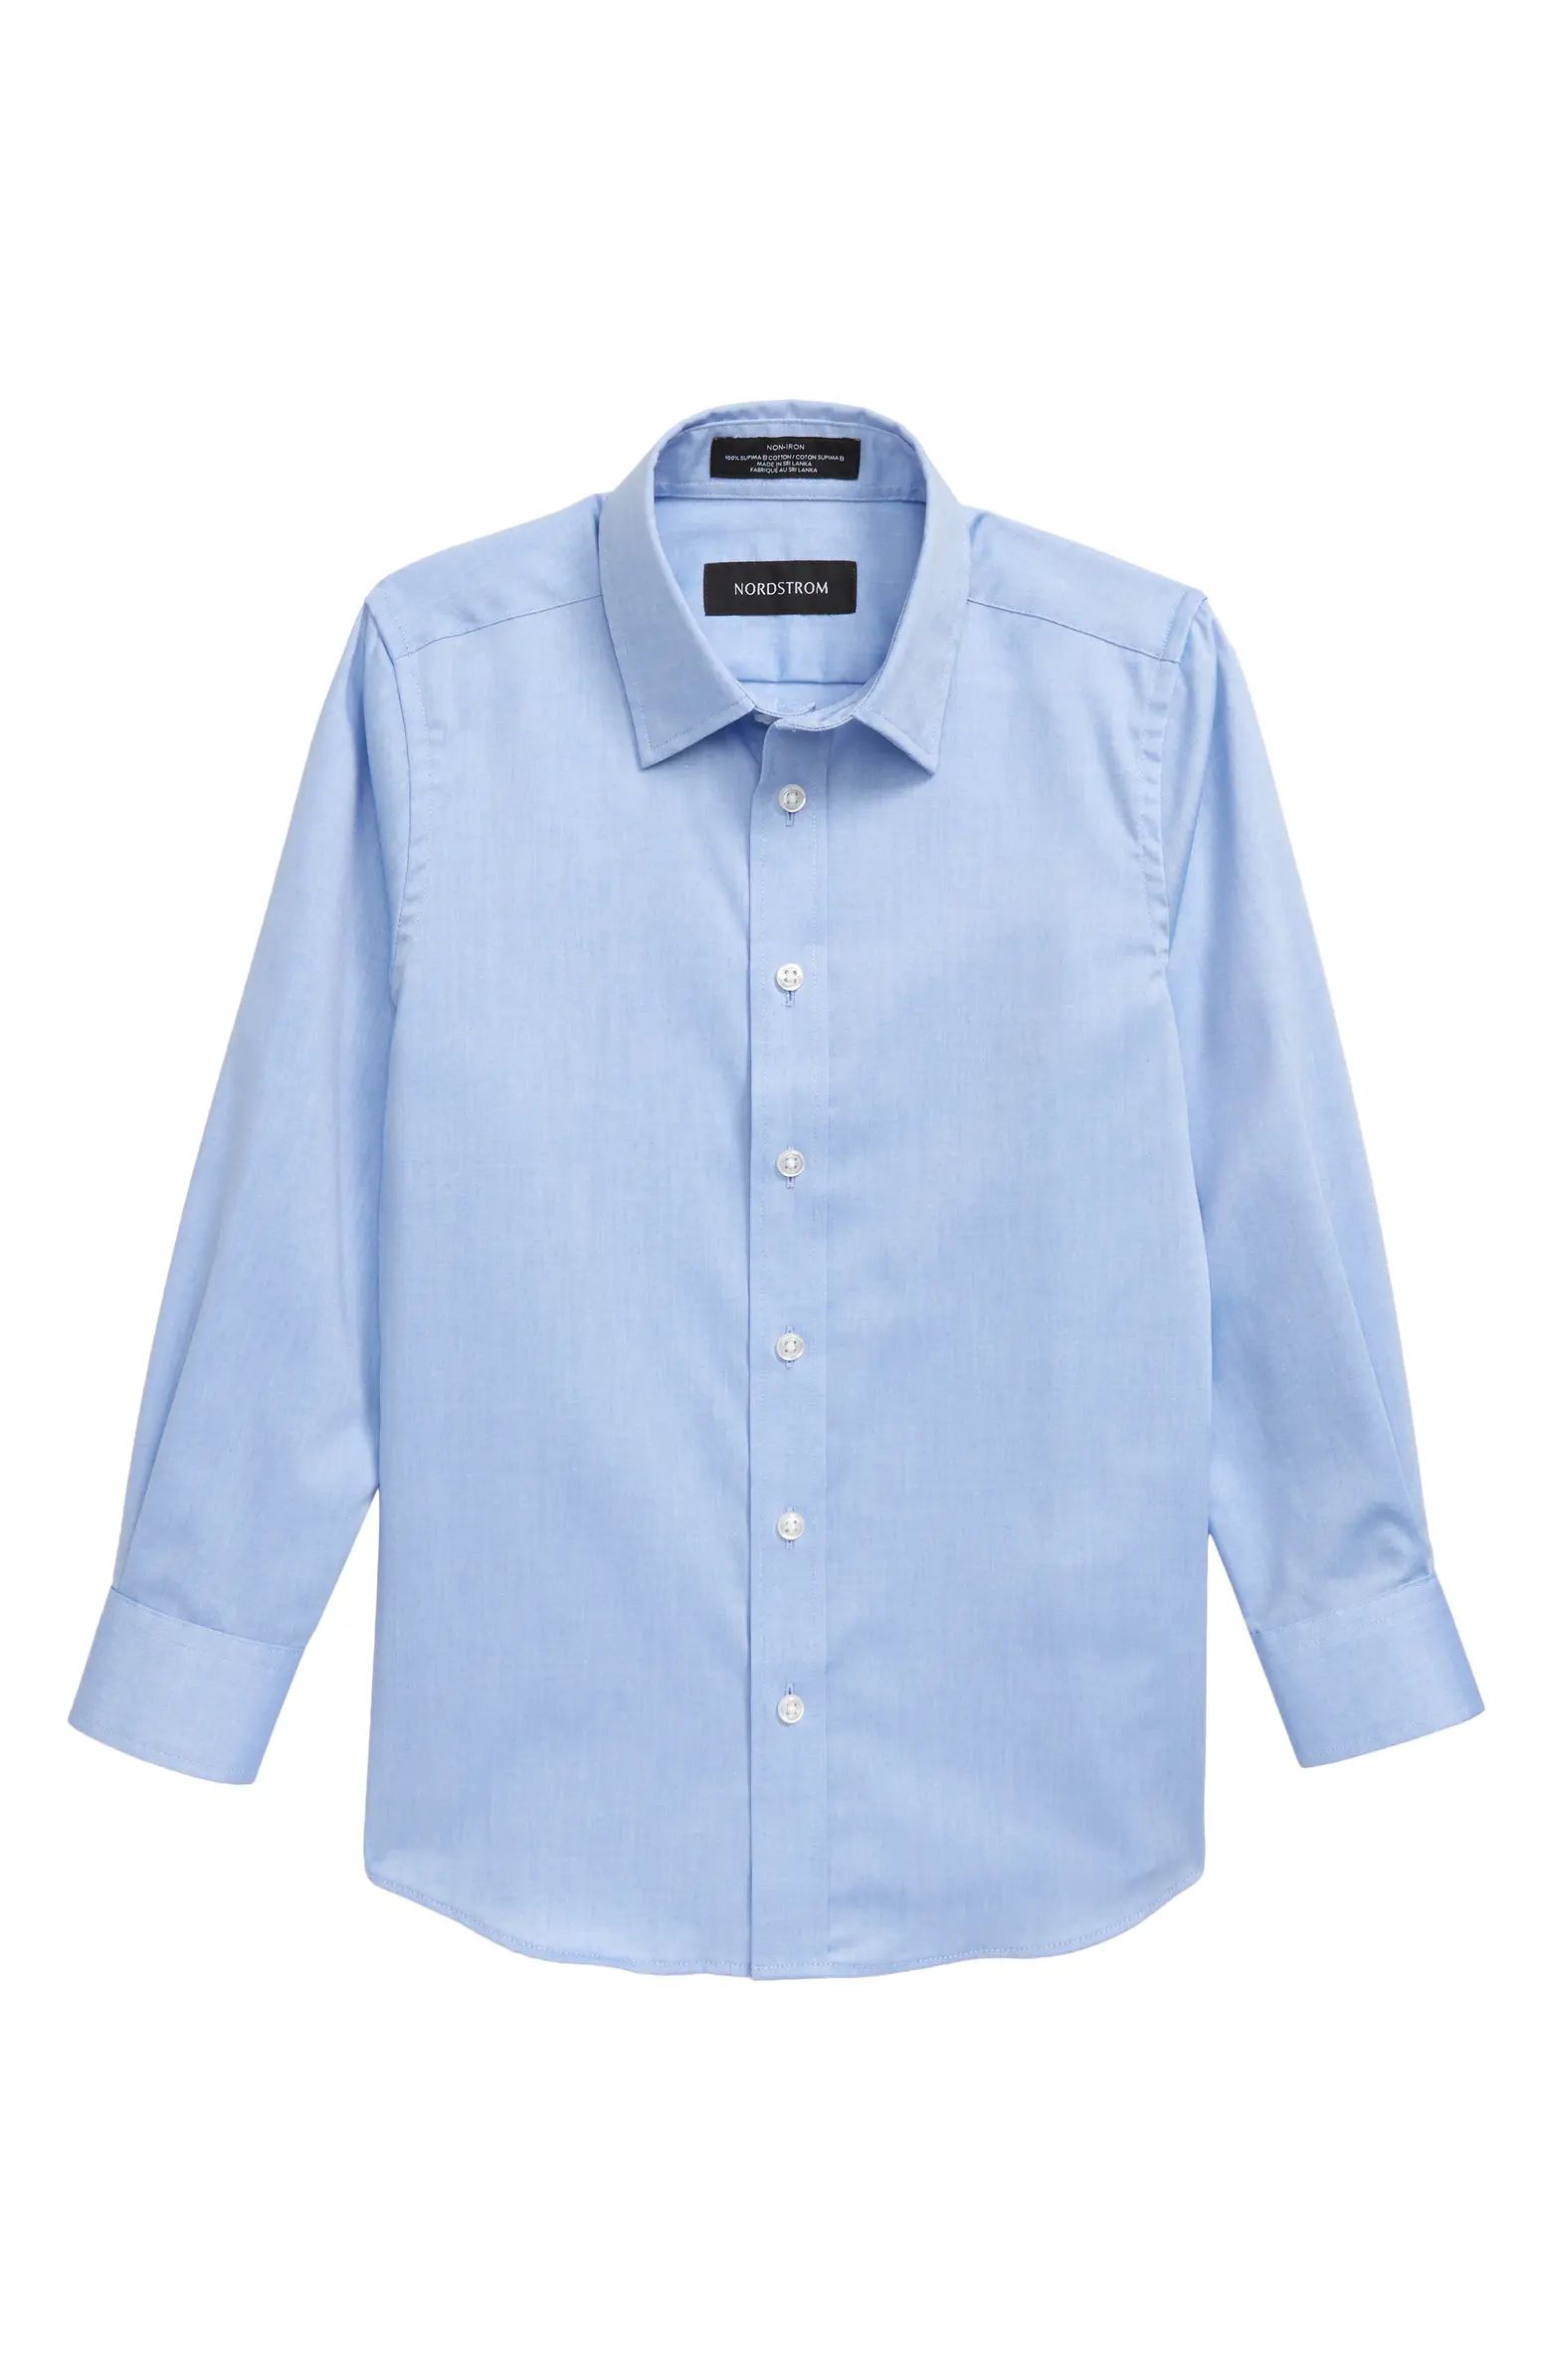 Kids' Solid Cotton Button-Up Shirt | Nordstrom